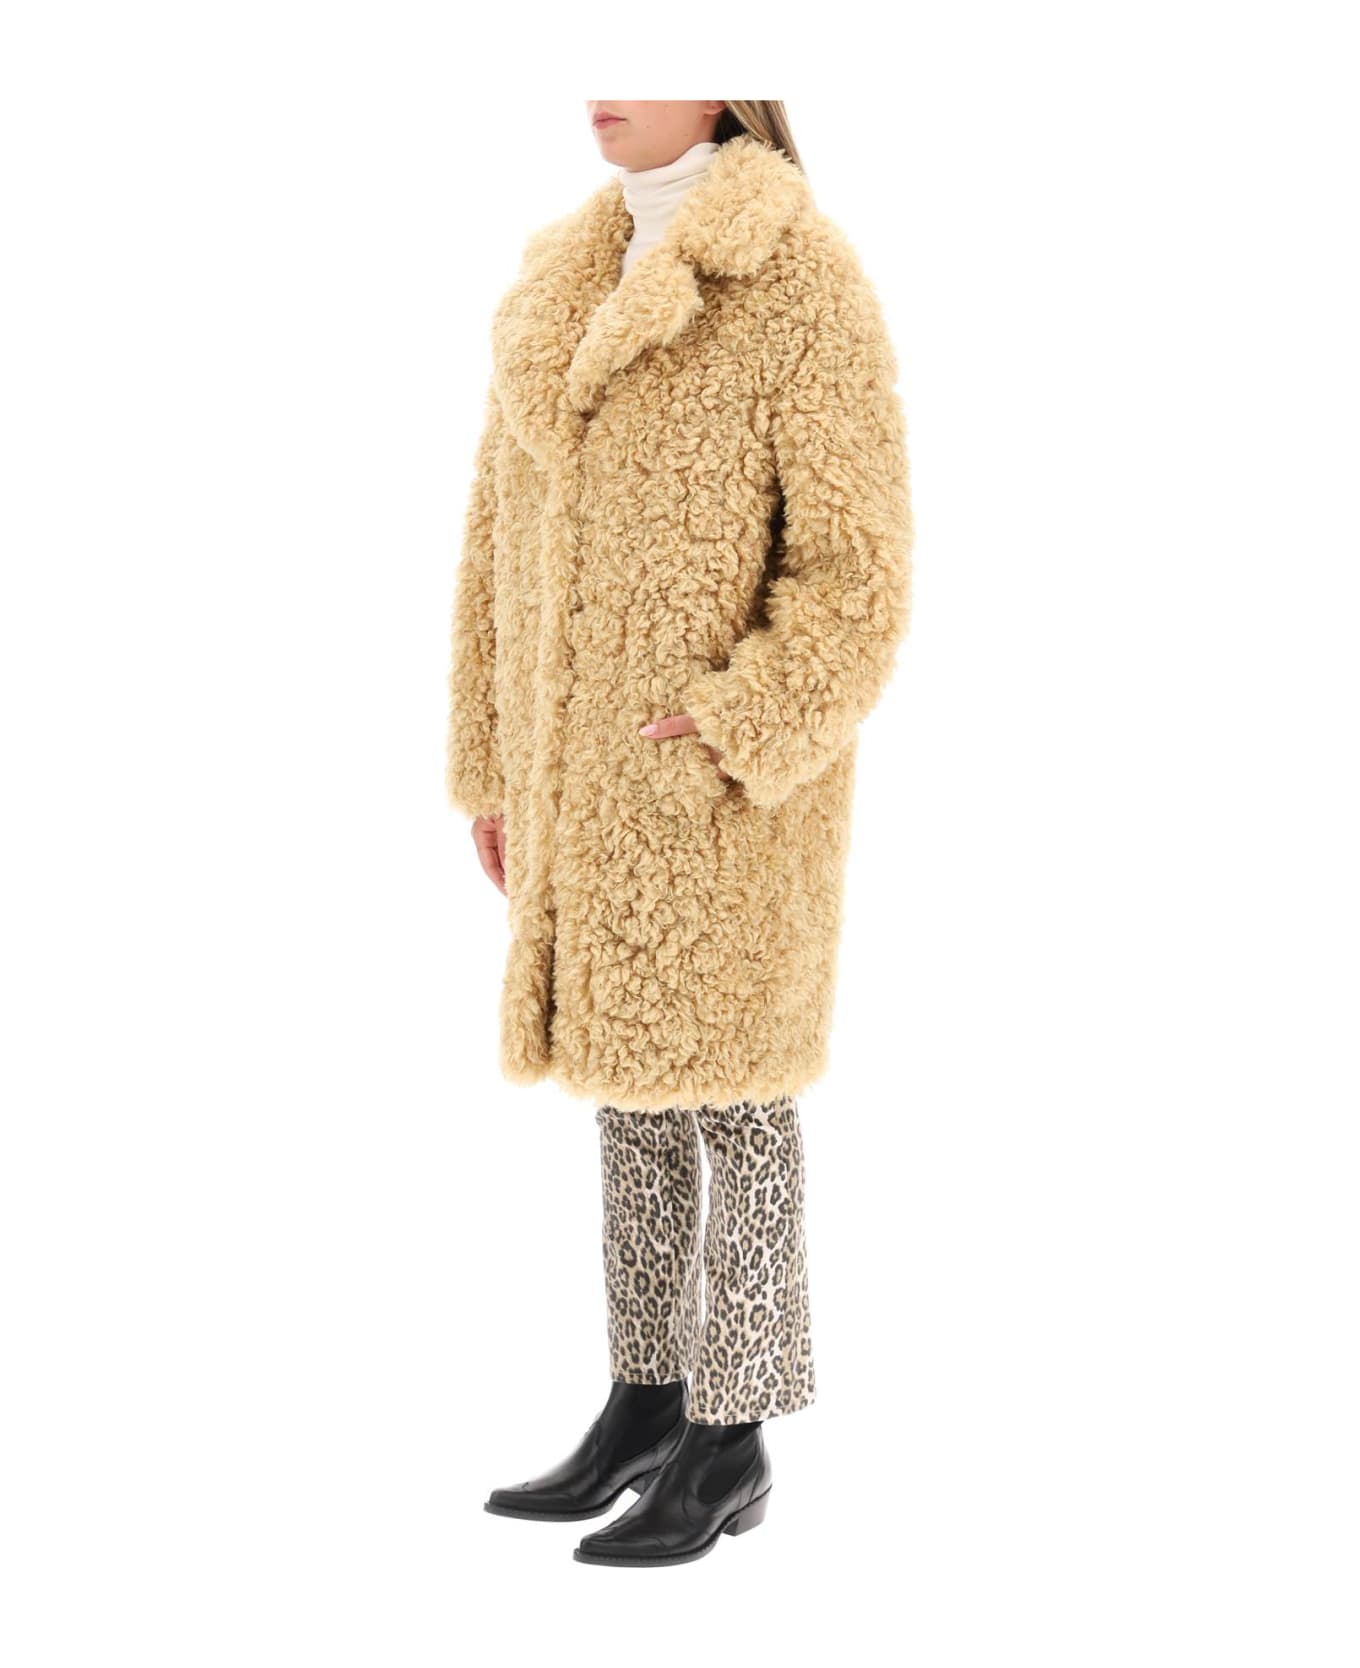 STAND STUDIO 'camille' Faux Fur Cocoon Coat - LIGHT CARAMEL (Brown)